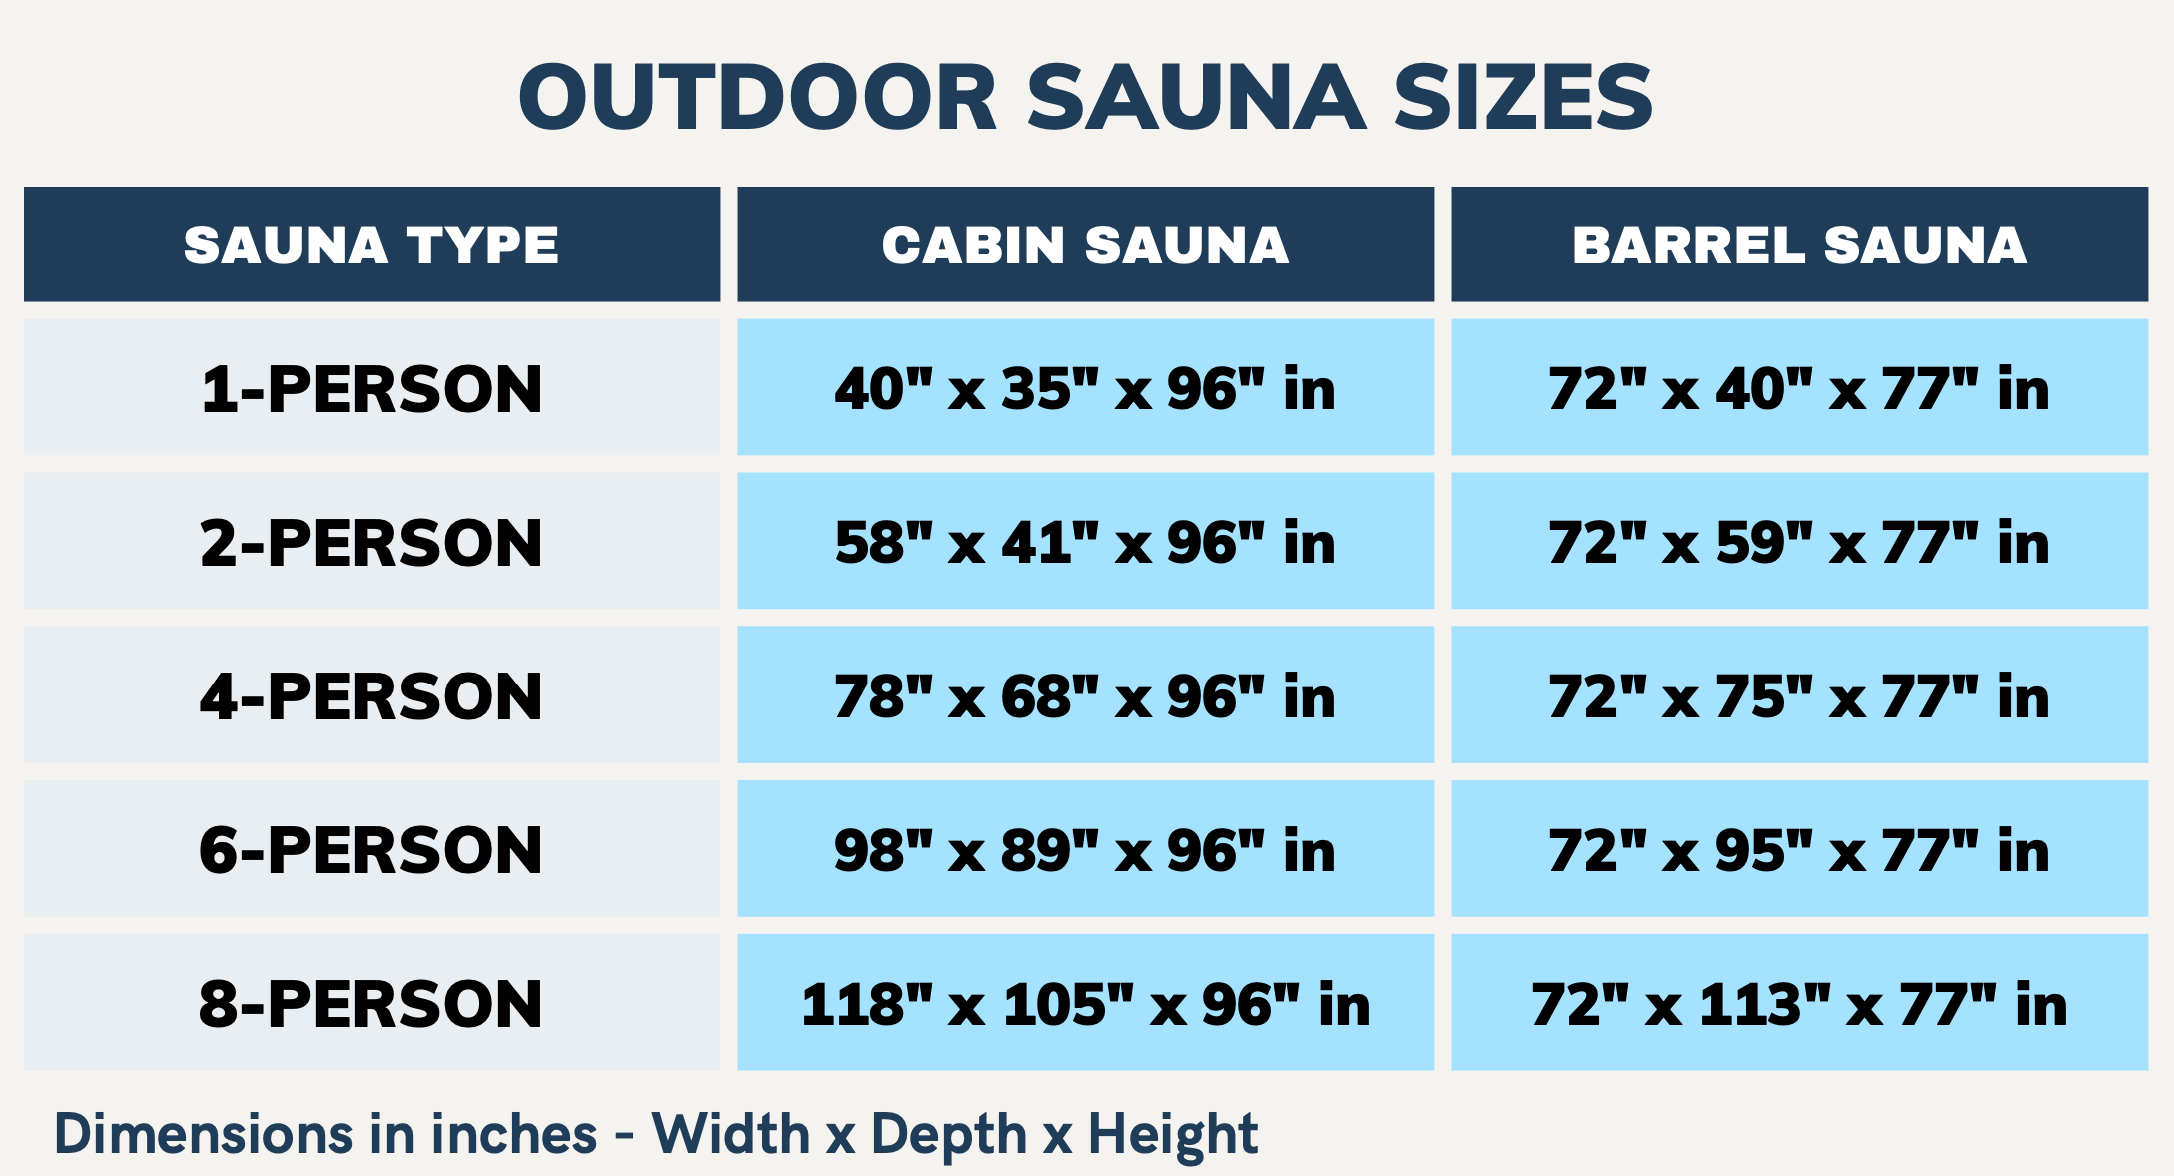 table showing dimesnions and size of outdoor saunas